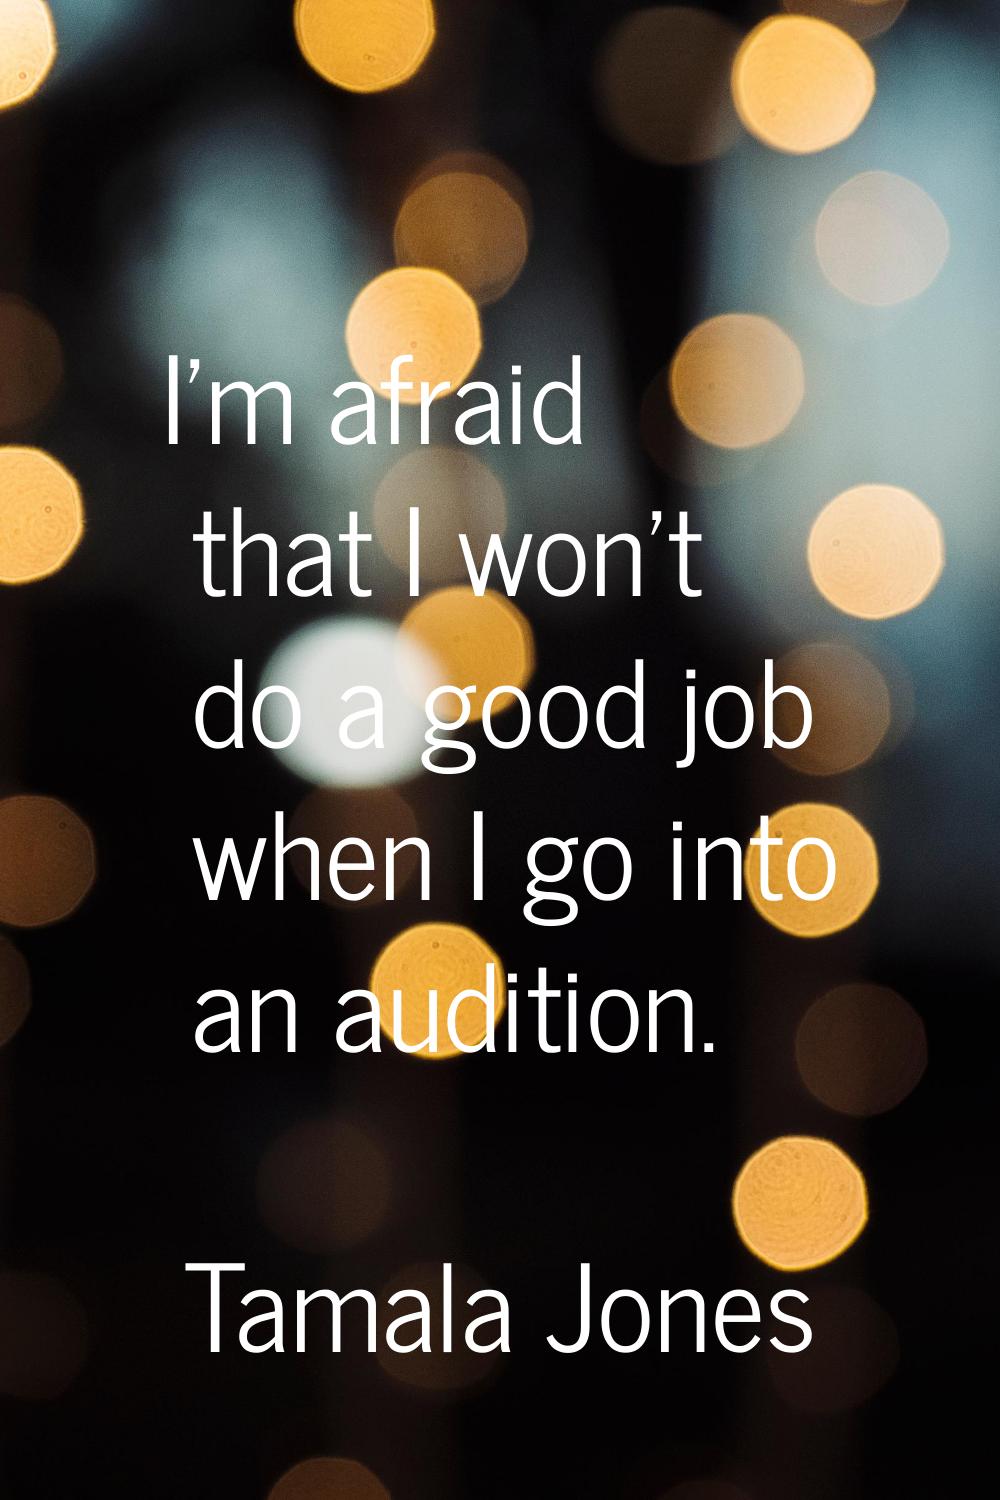 I'm afraid that I won't do a good job when I go into an audition.